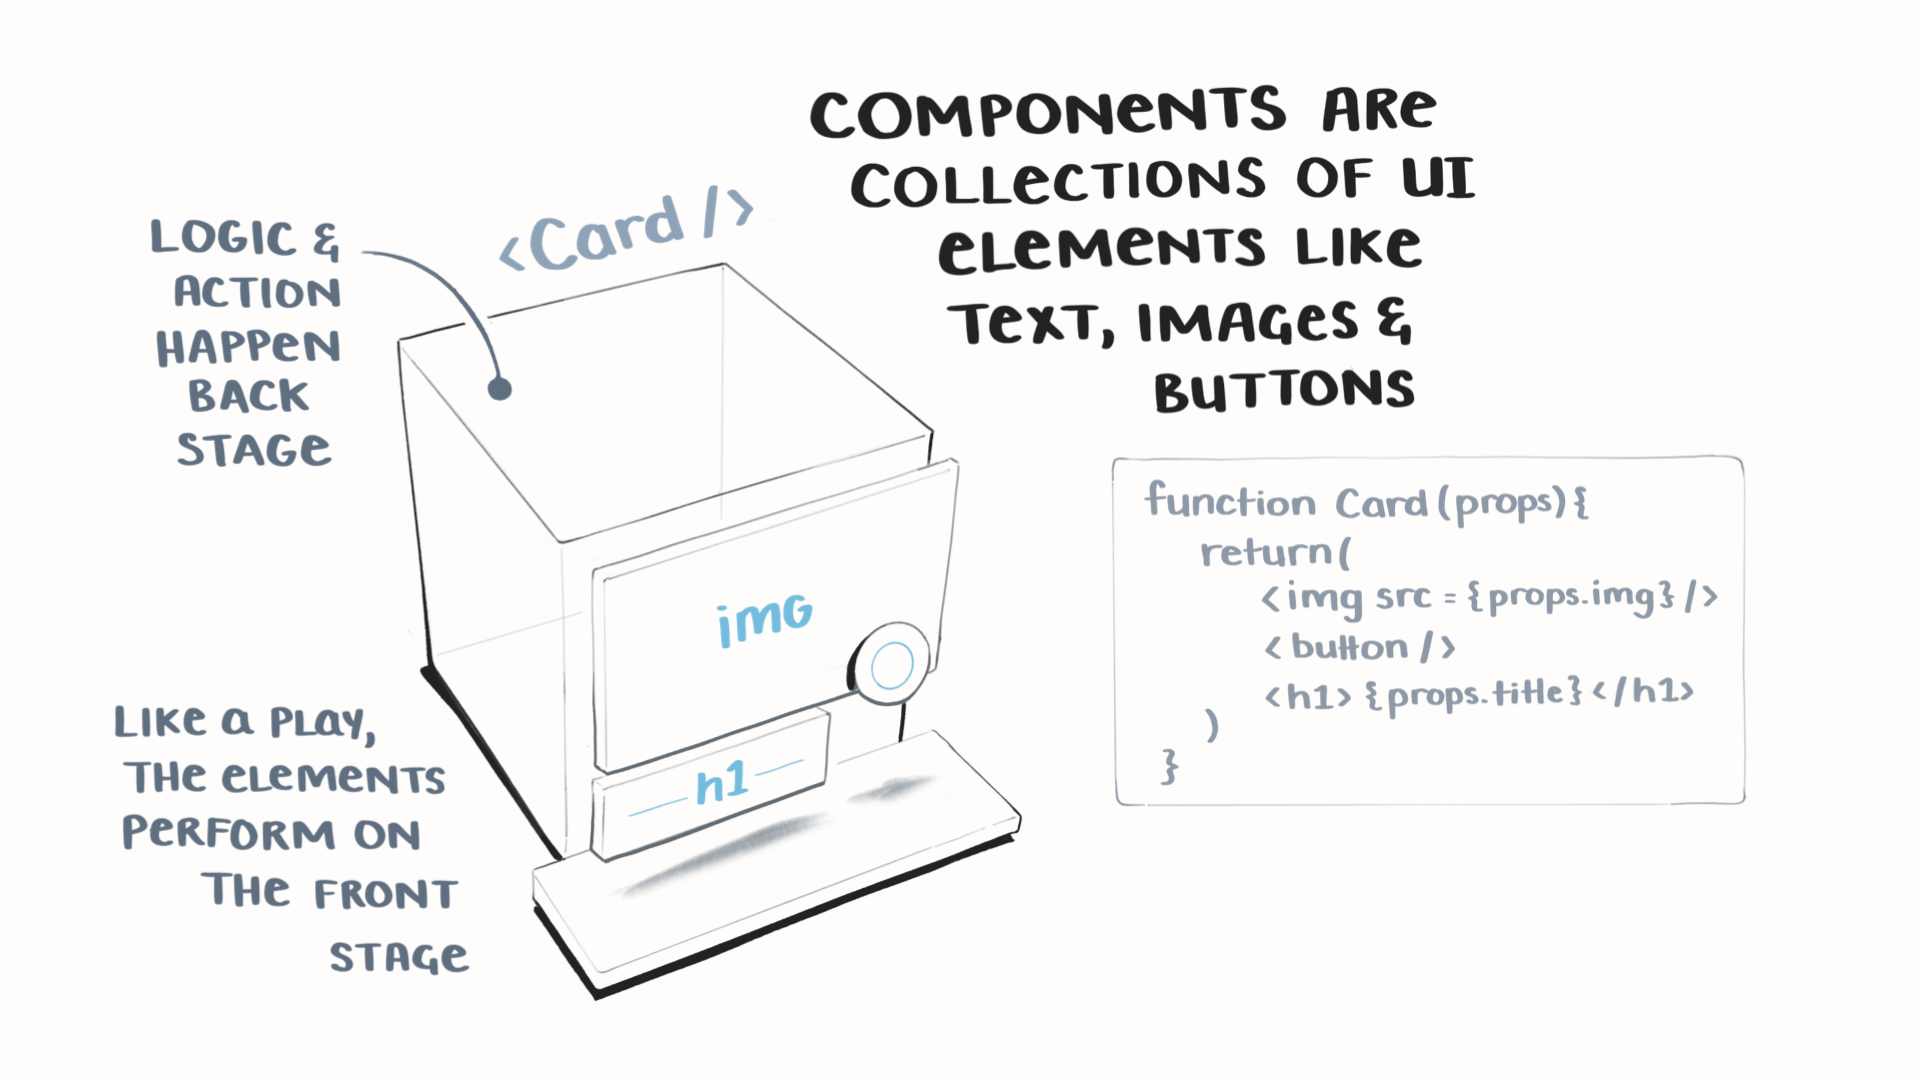 Components are collections